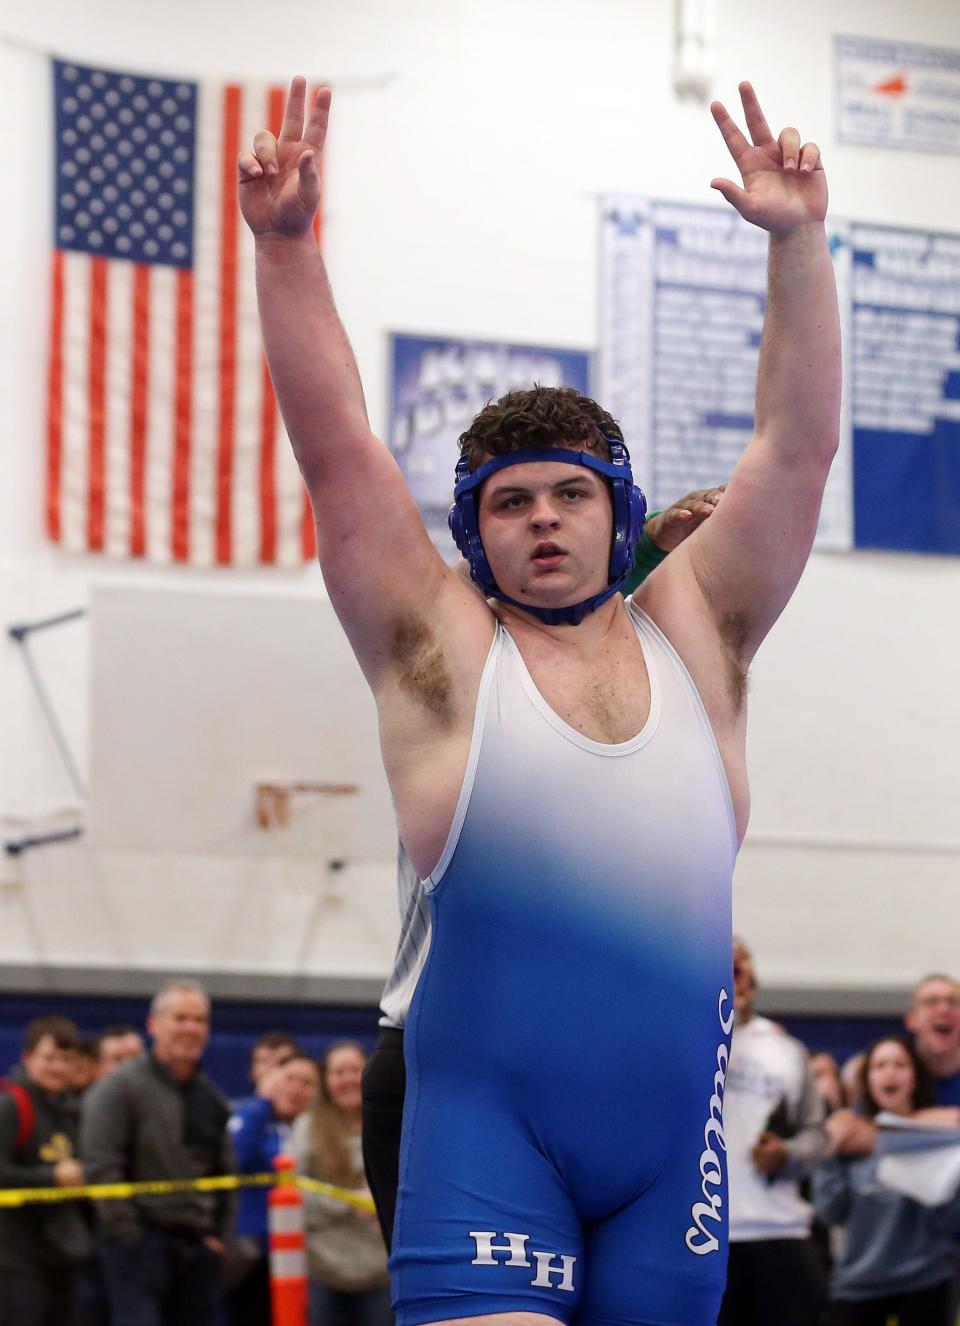 Hendrick Hudson's Mason Dietz celebrates his victory over Putnam Valley's Jaden Tesher in the 285-pound weight class during the Section 1 Division II wrestling championships at Hendrick Hudson High School in Montrose Feb. 11, 2023. 